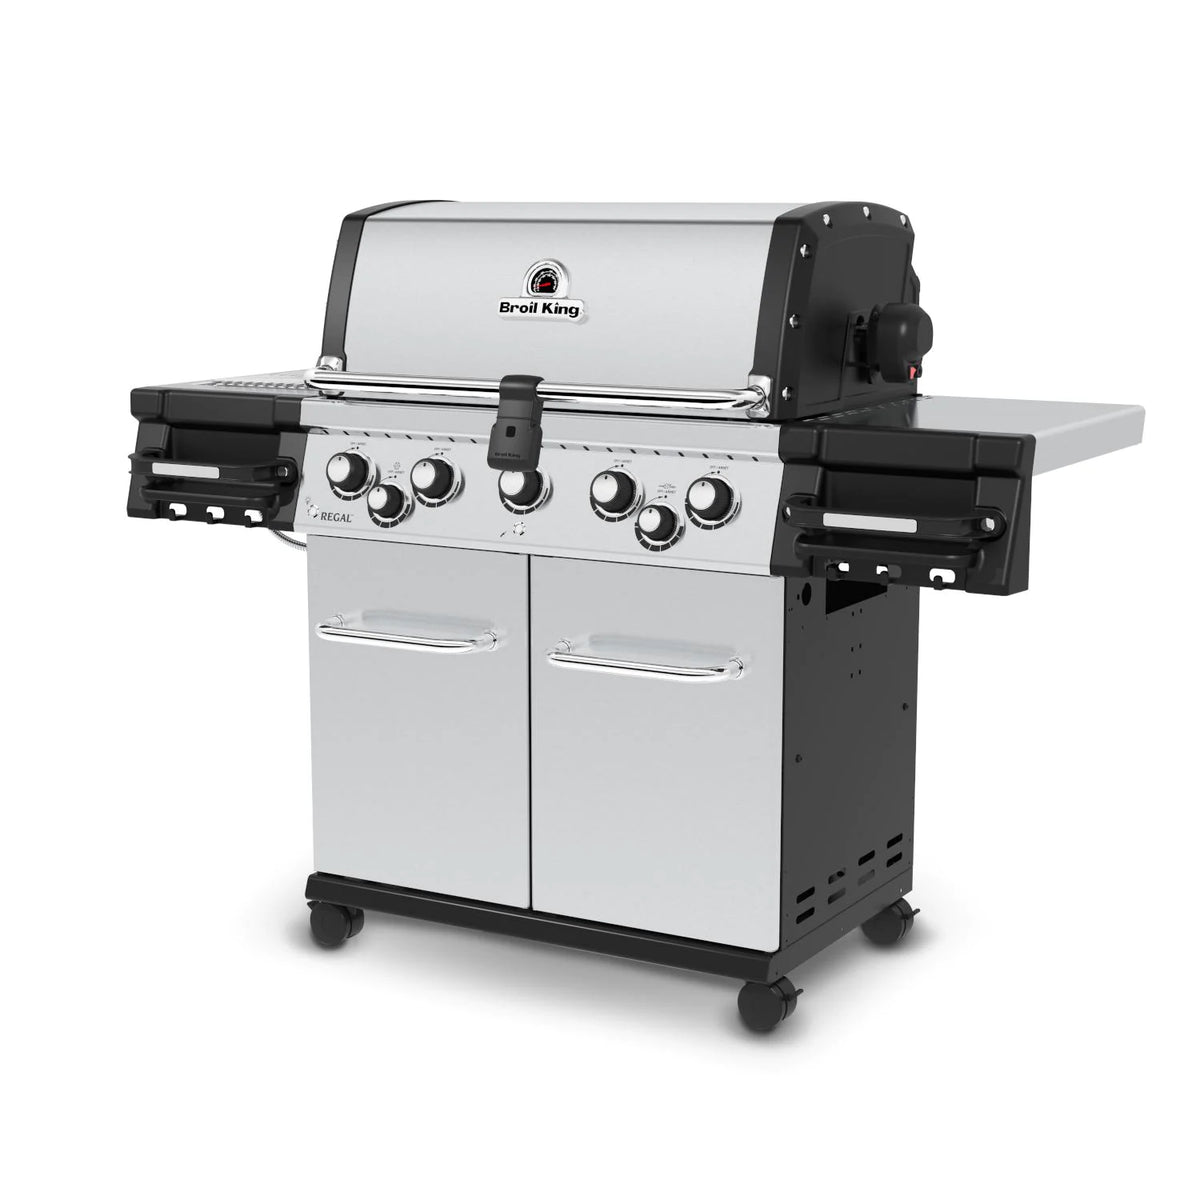 Broil King 958944 Regal S 590 PRO IR 5-Burner Propane Gas Grill With Rotisserie &amp; Infrared Side Burner - Stainless Steel - Side View